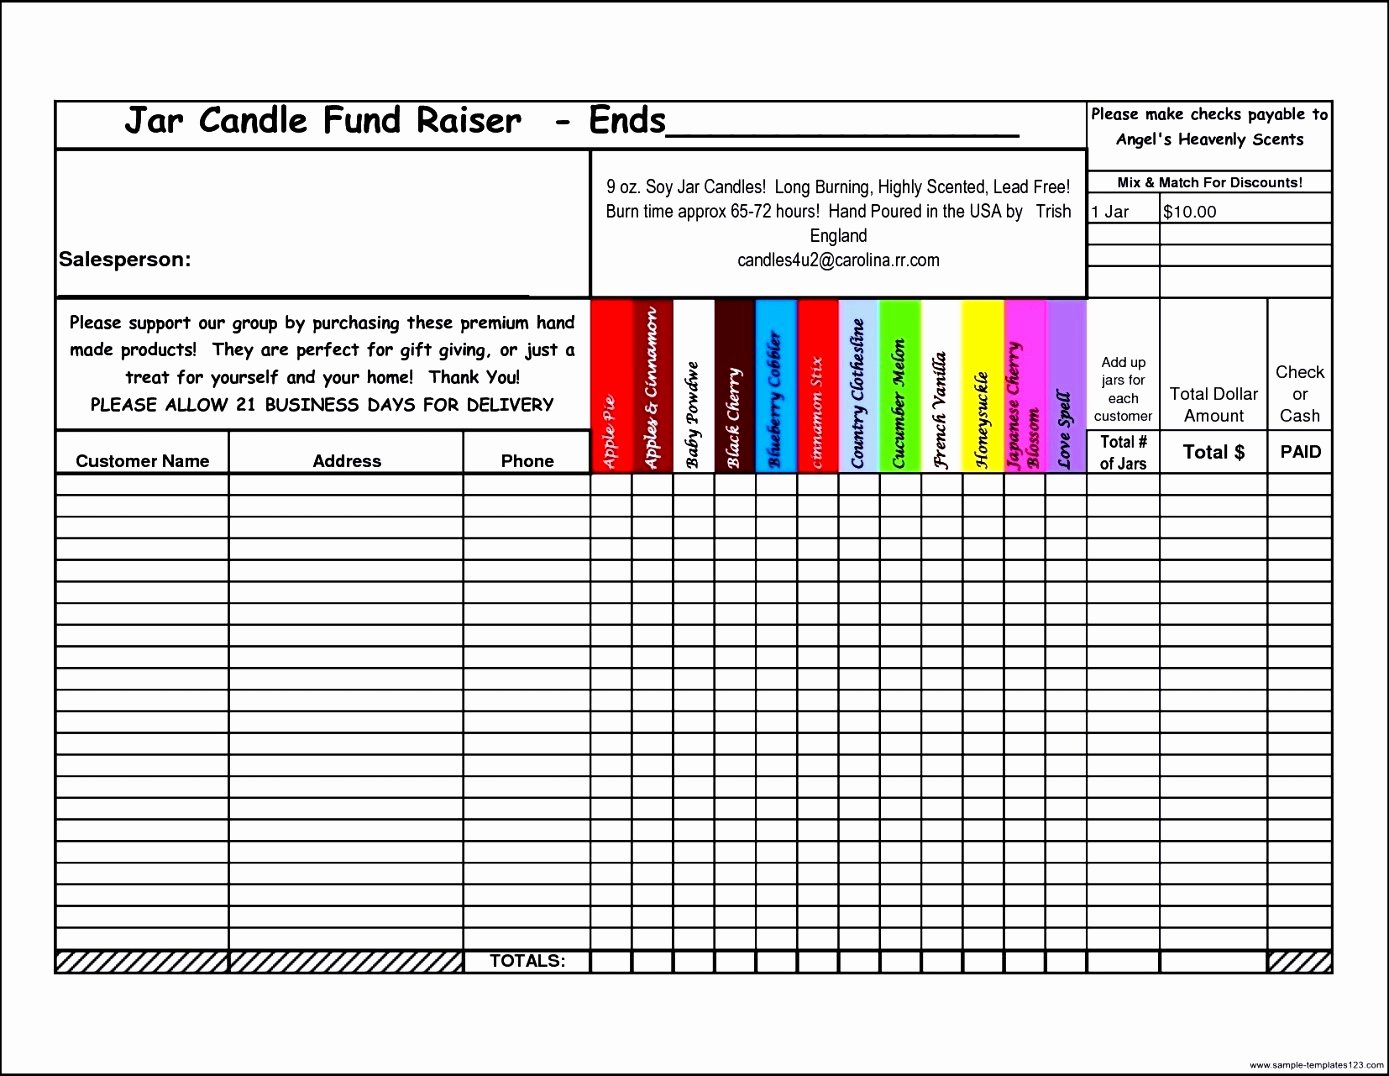 Fundraiser order form Template Free Elegant Fundraising forms Templates Free Sample Business Loan